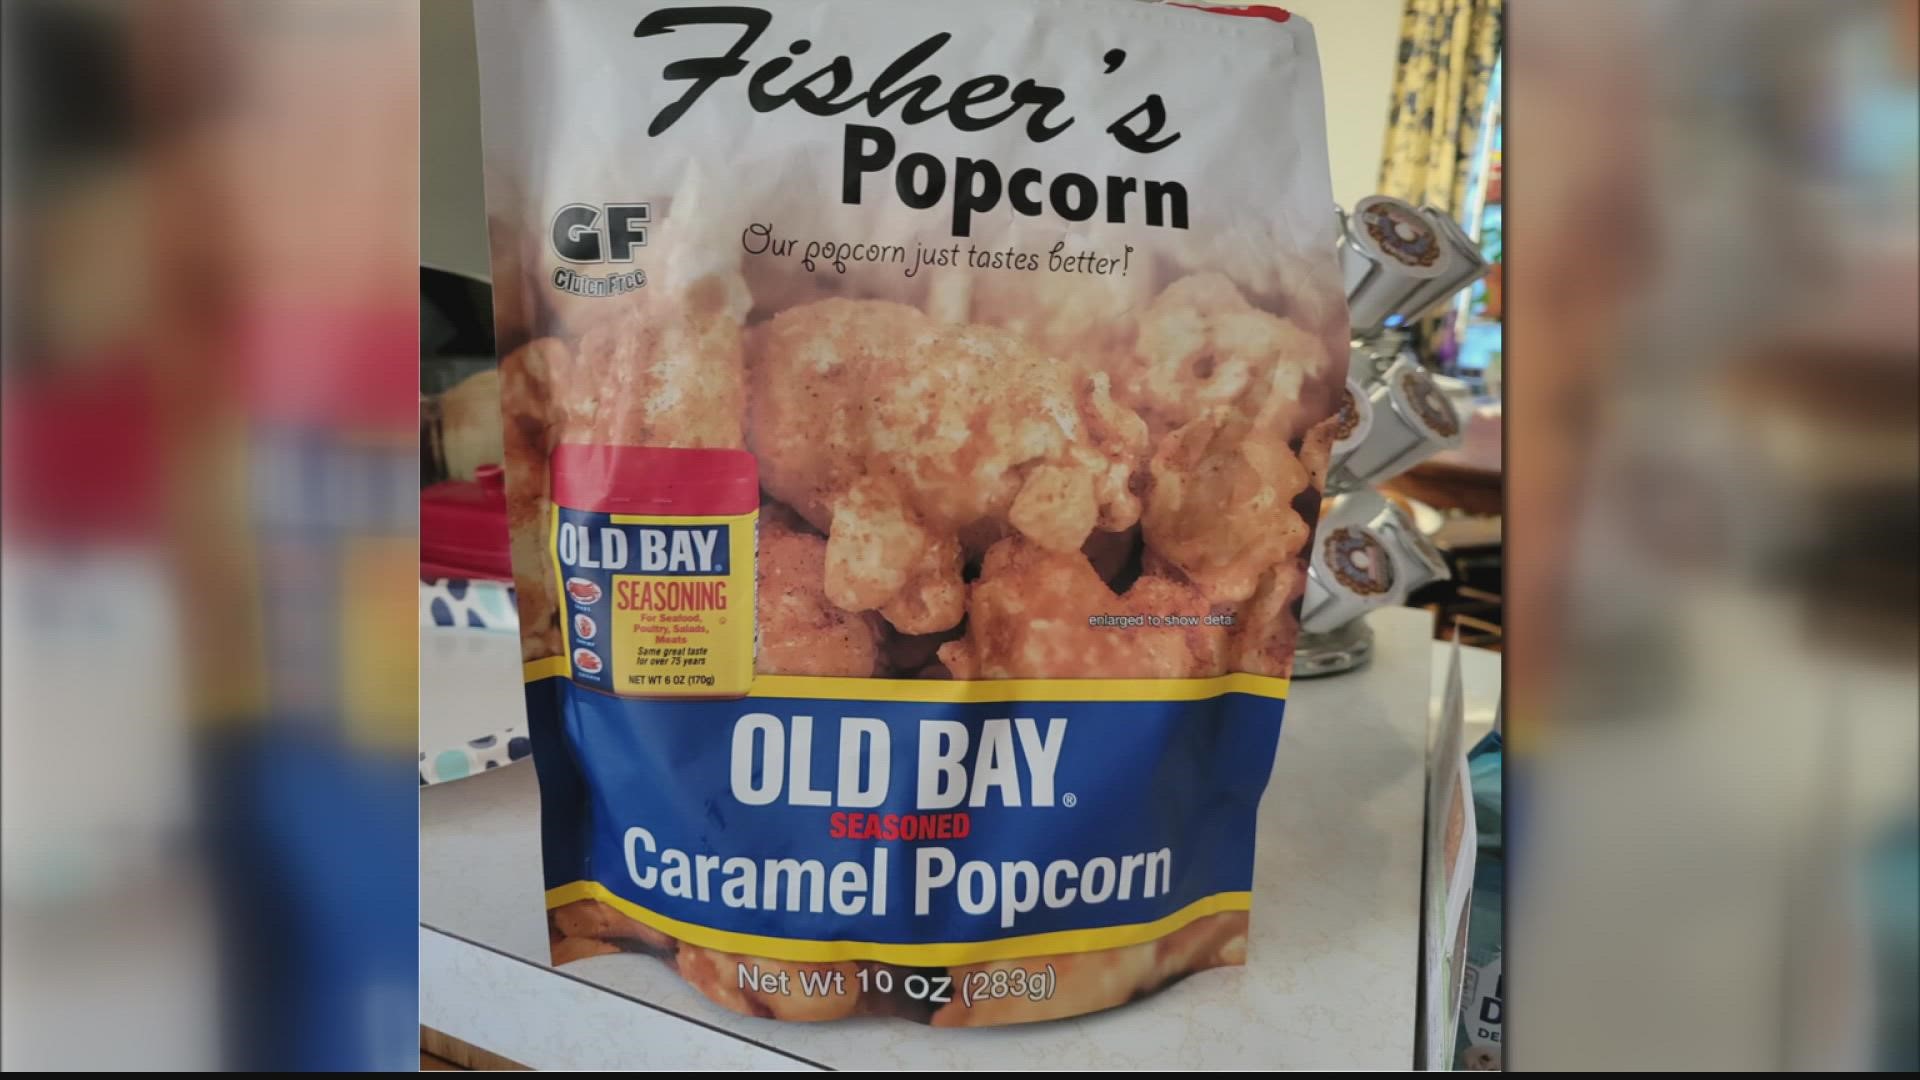 Our quest to feature every single Old Bay-themed product continues.